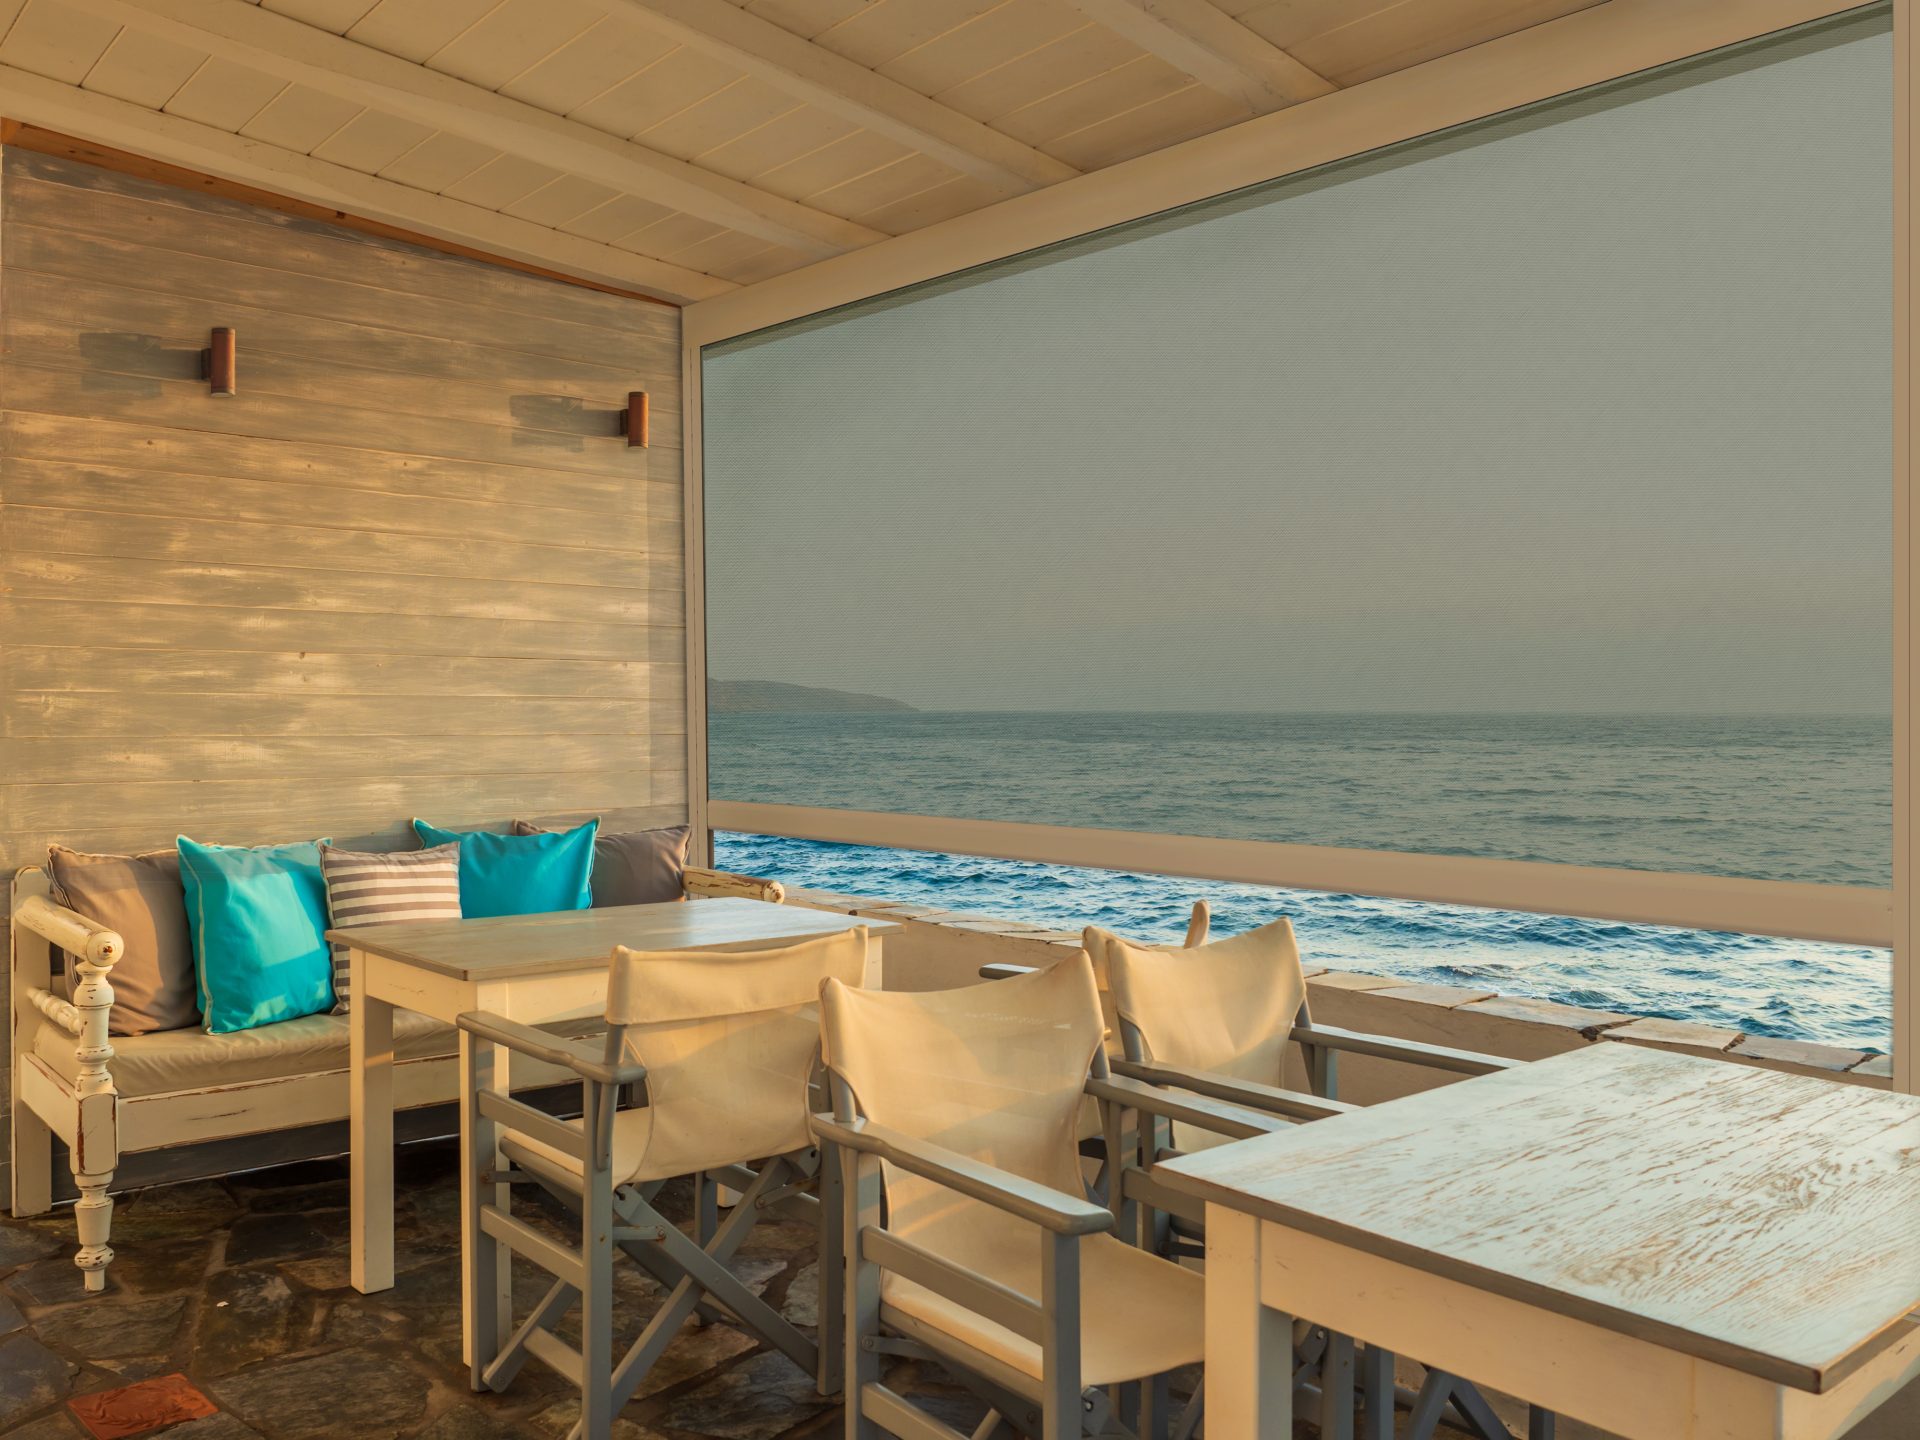 Outdoor Blinds with an ocean view